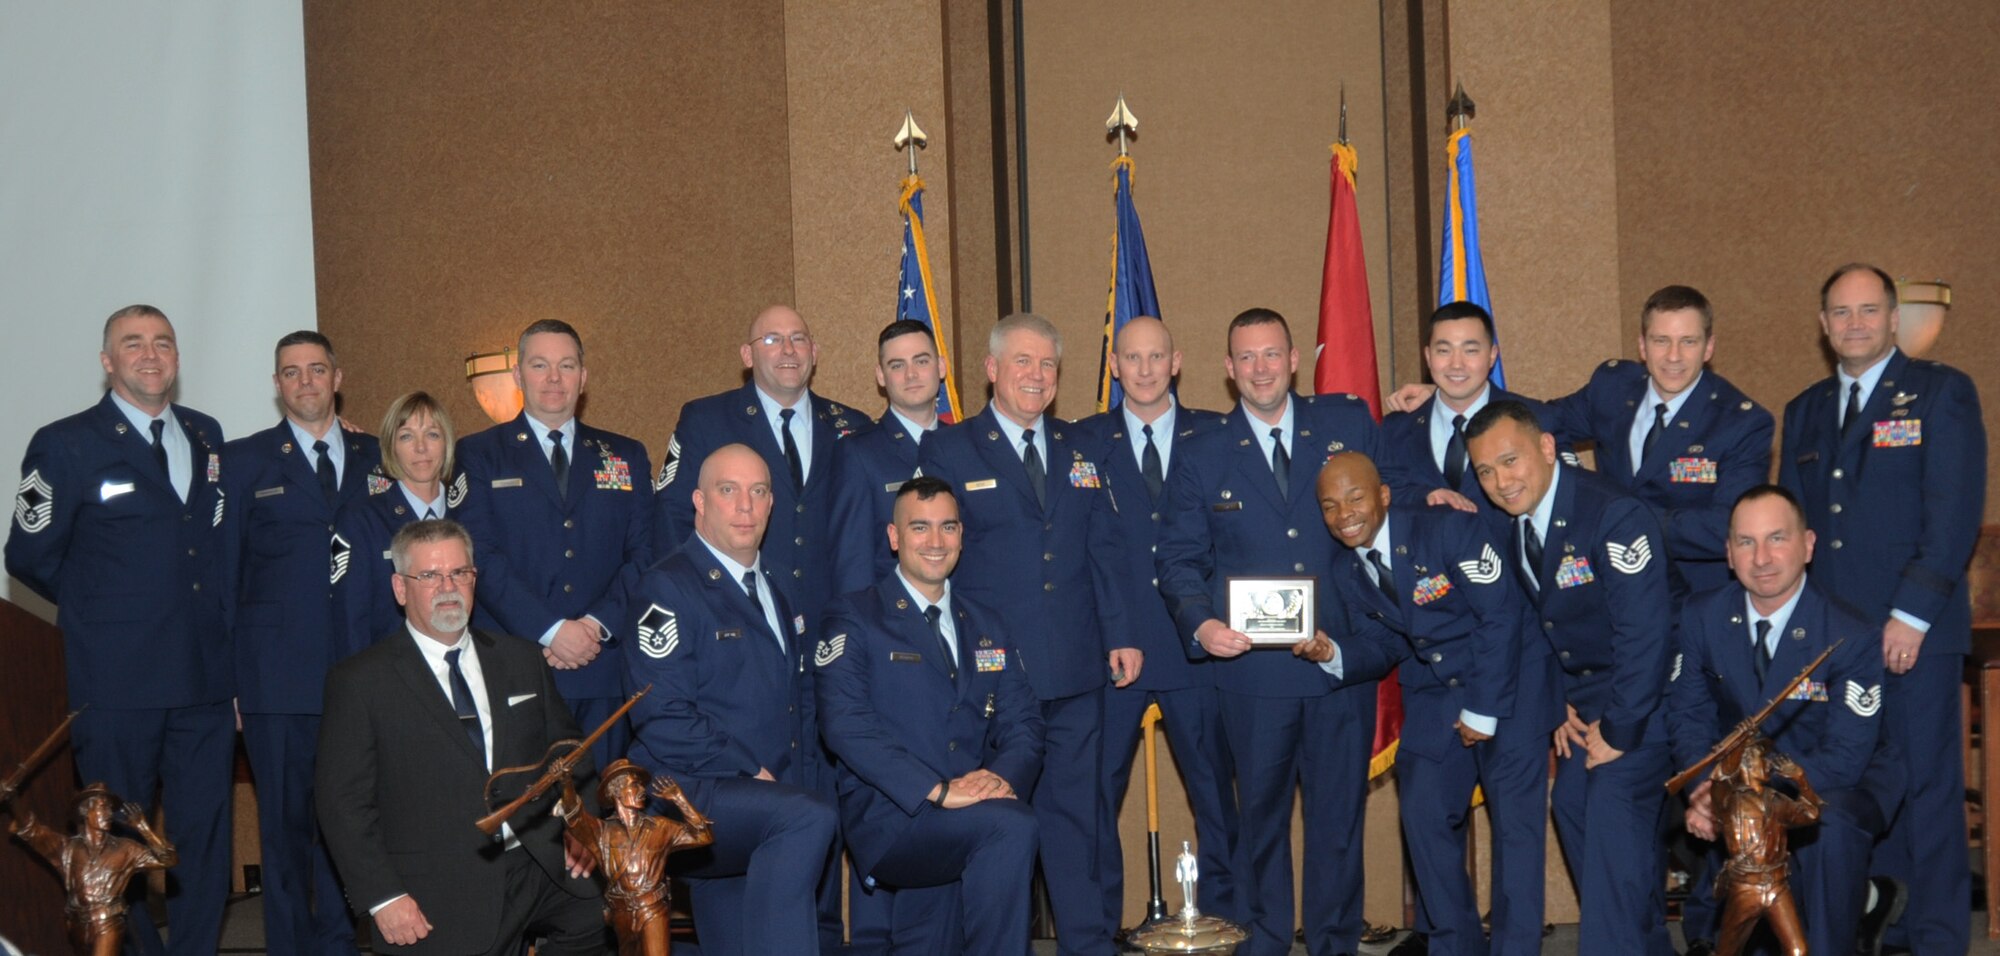 Members of the 142nd Civil Engineer Squadron, 142nd Fighter Wing, gather for a group photograph with Air Component Commander Brig. Gen. Michael Stencel, far right, during the 21st Annual Oregon Air National Guard Awards Banquet, March 14, 2015, Portland, Ore. The 142nd CES was awarded the Oregon Air National Guard’s Outstanding Unit of the Year Award for 2014.